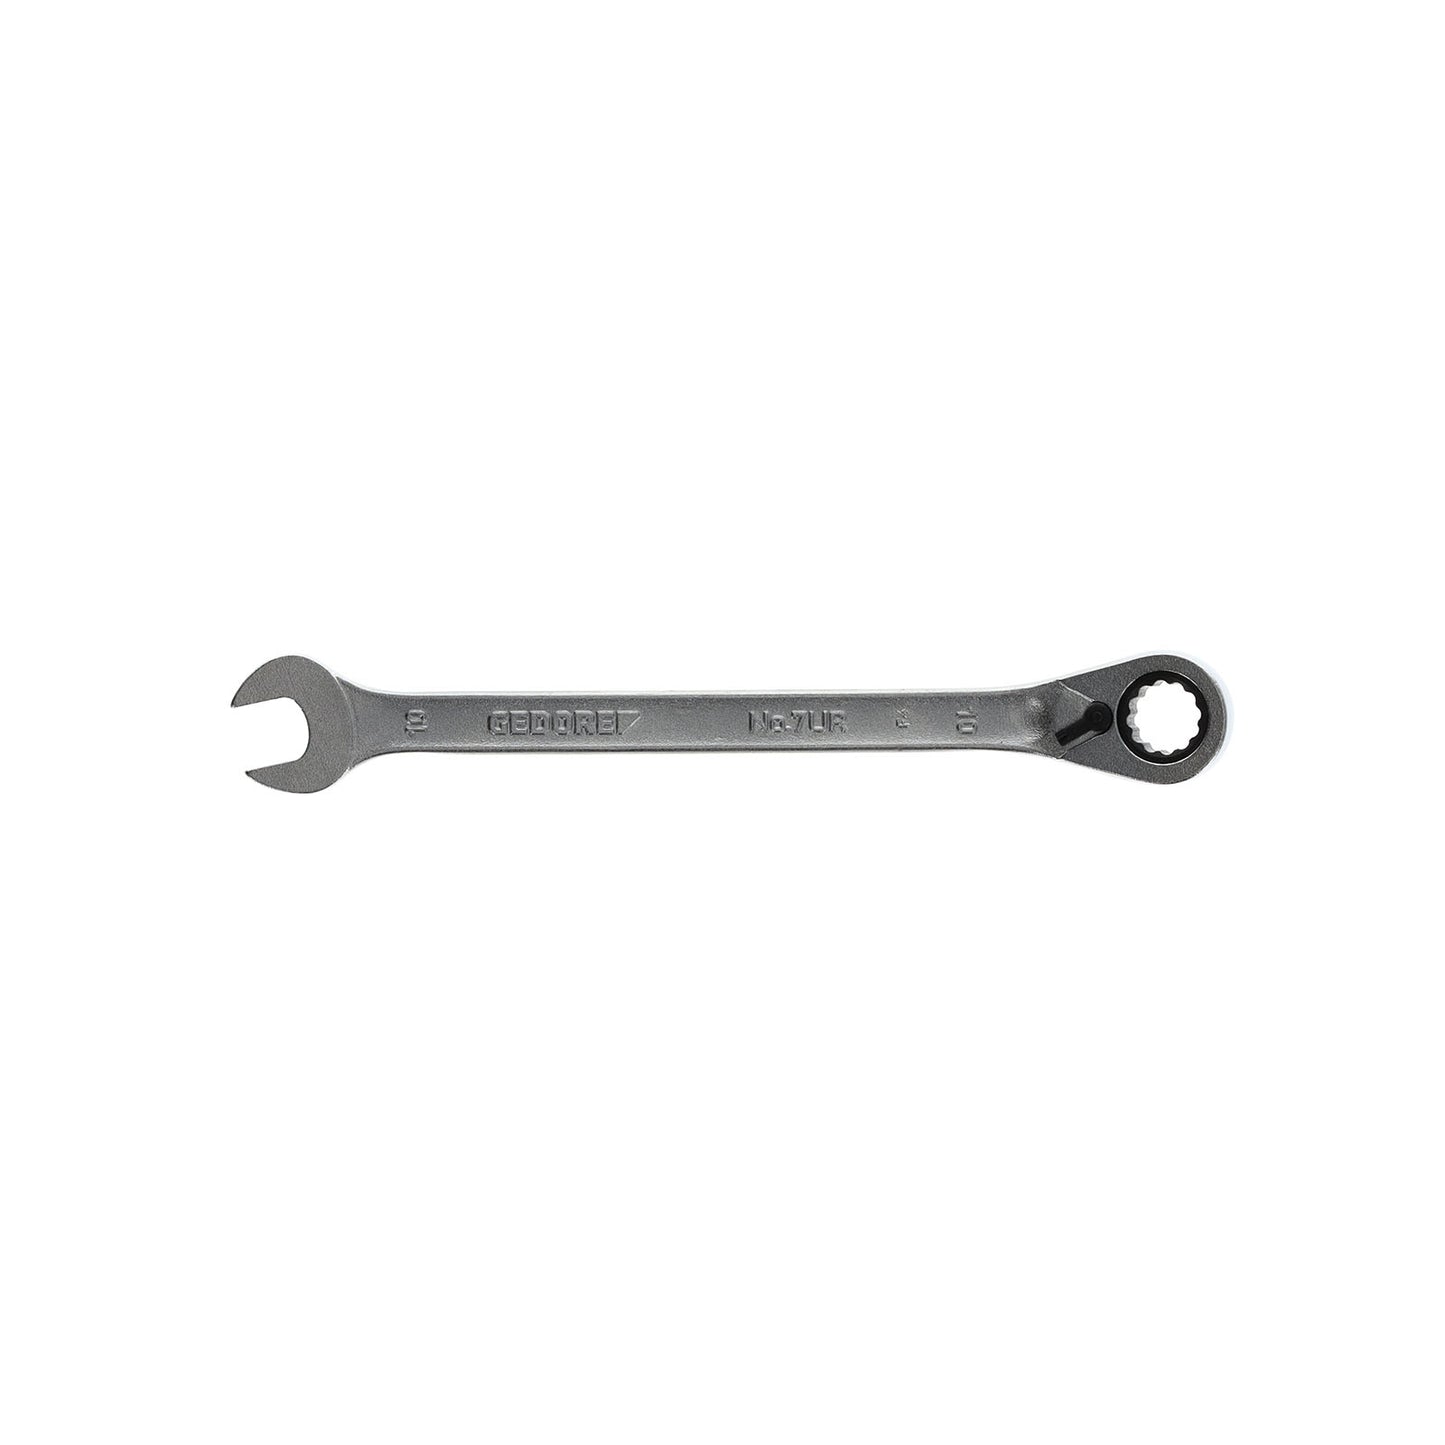 GEDORE 7 UR 10 - Ratchet combination wrench, 10mm (2297272)